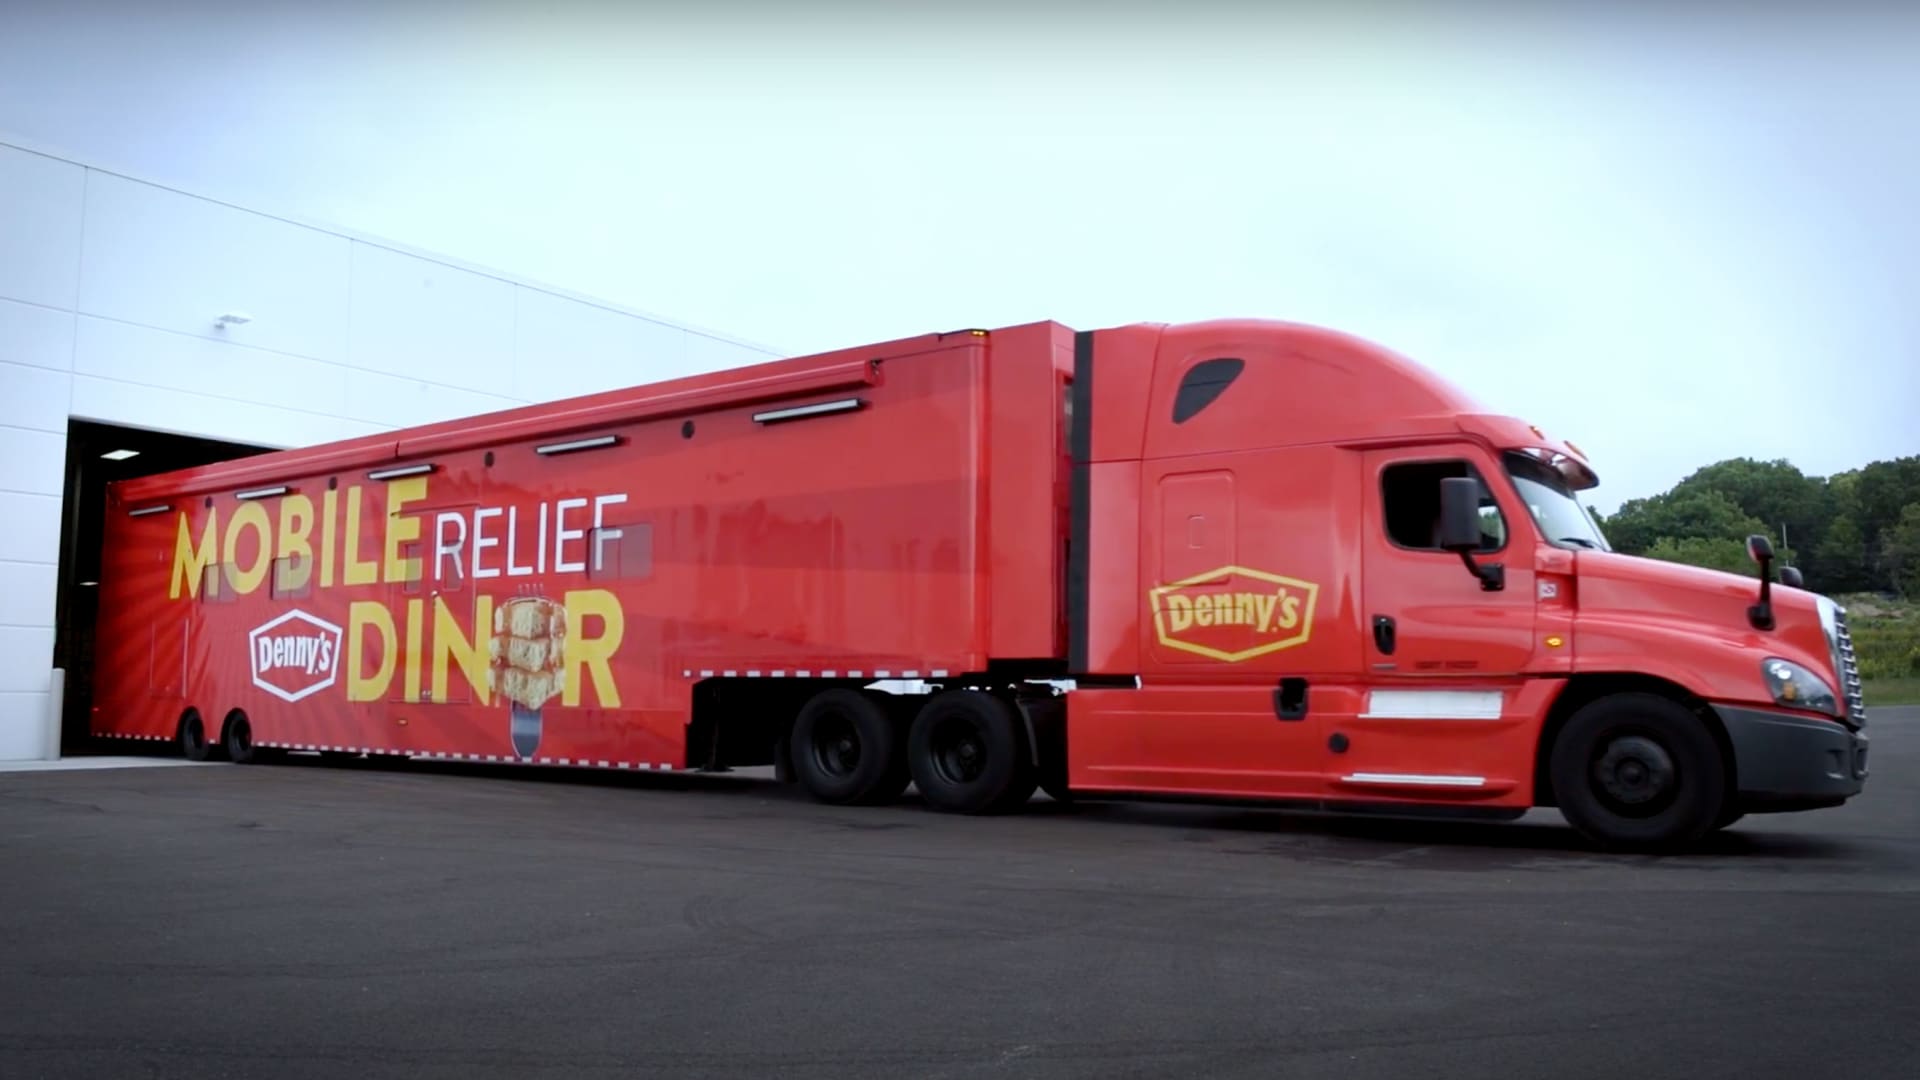 Denny's Mobile Relief Diner